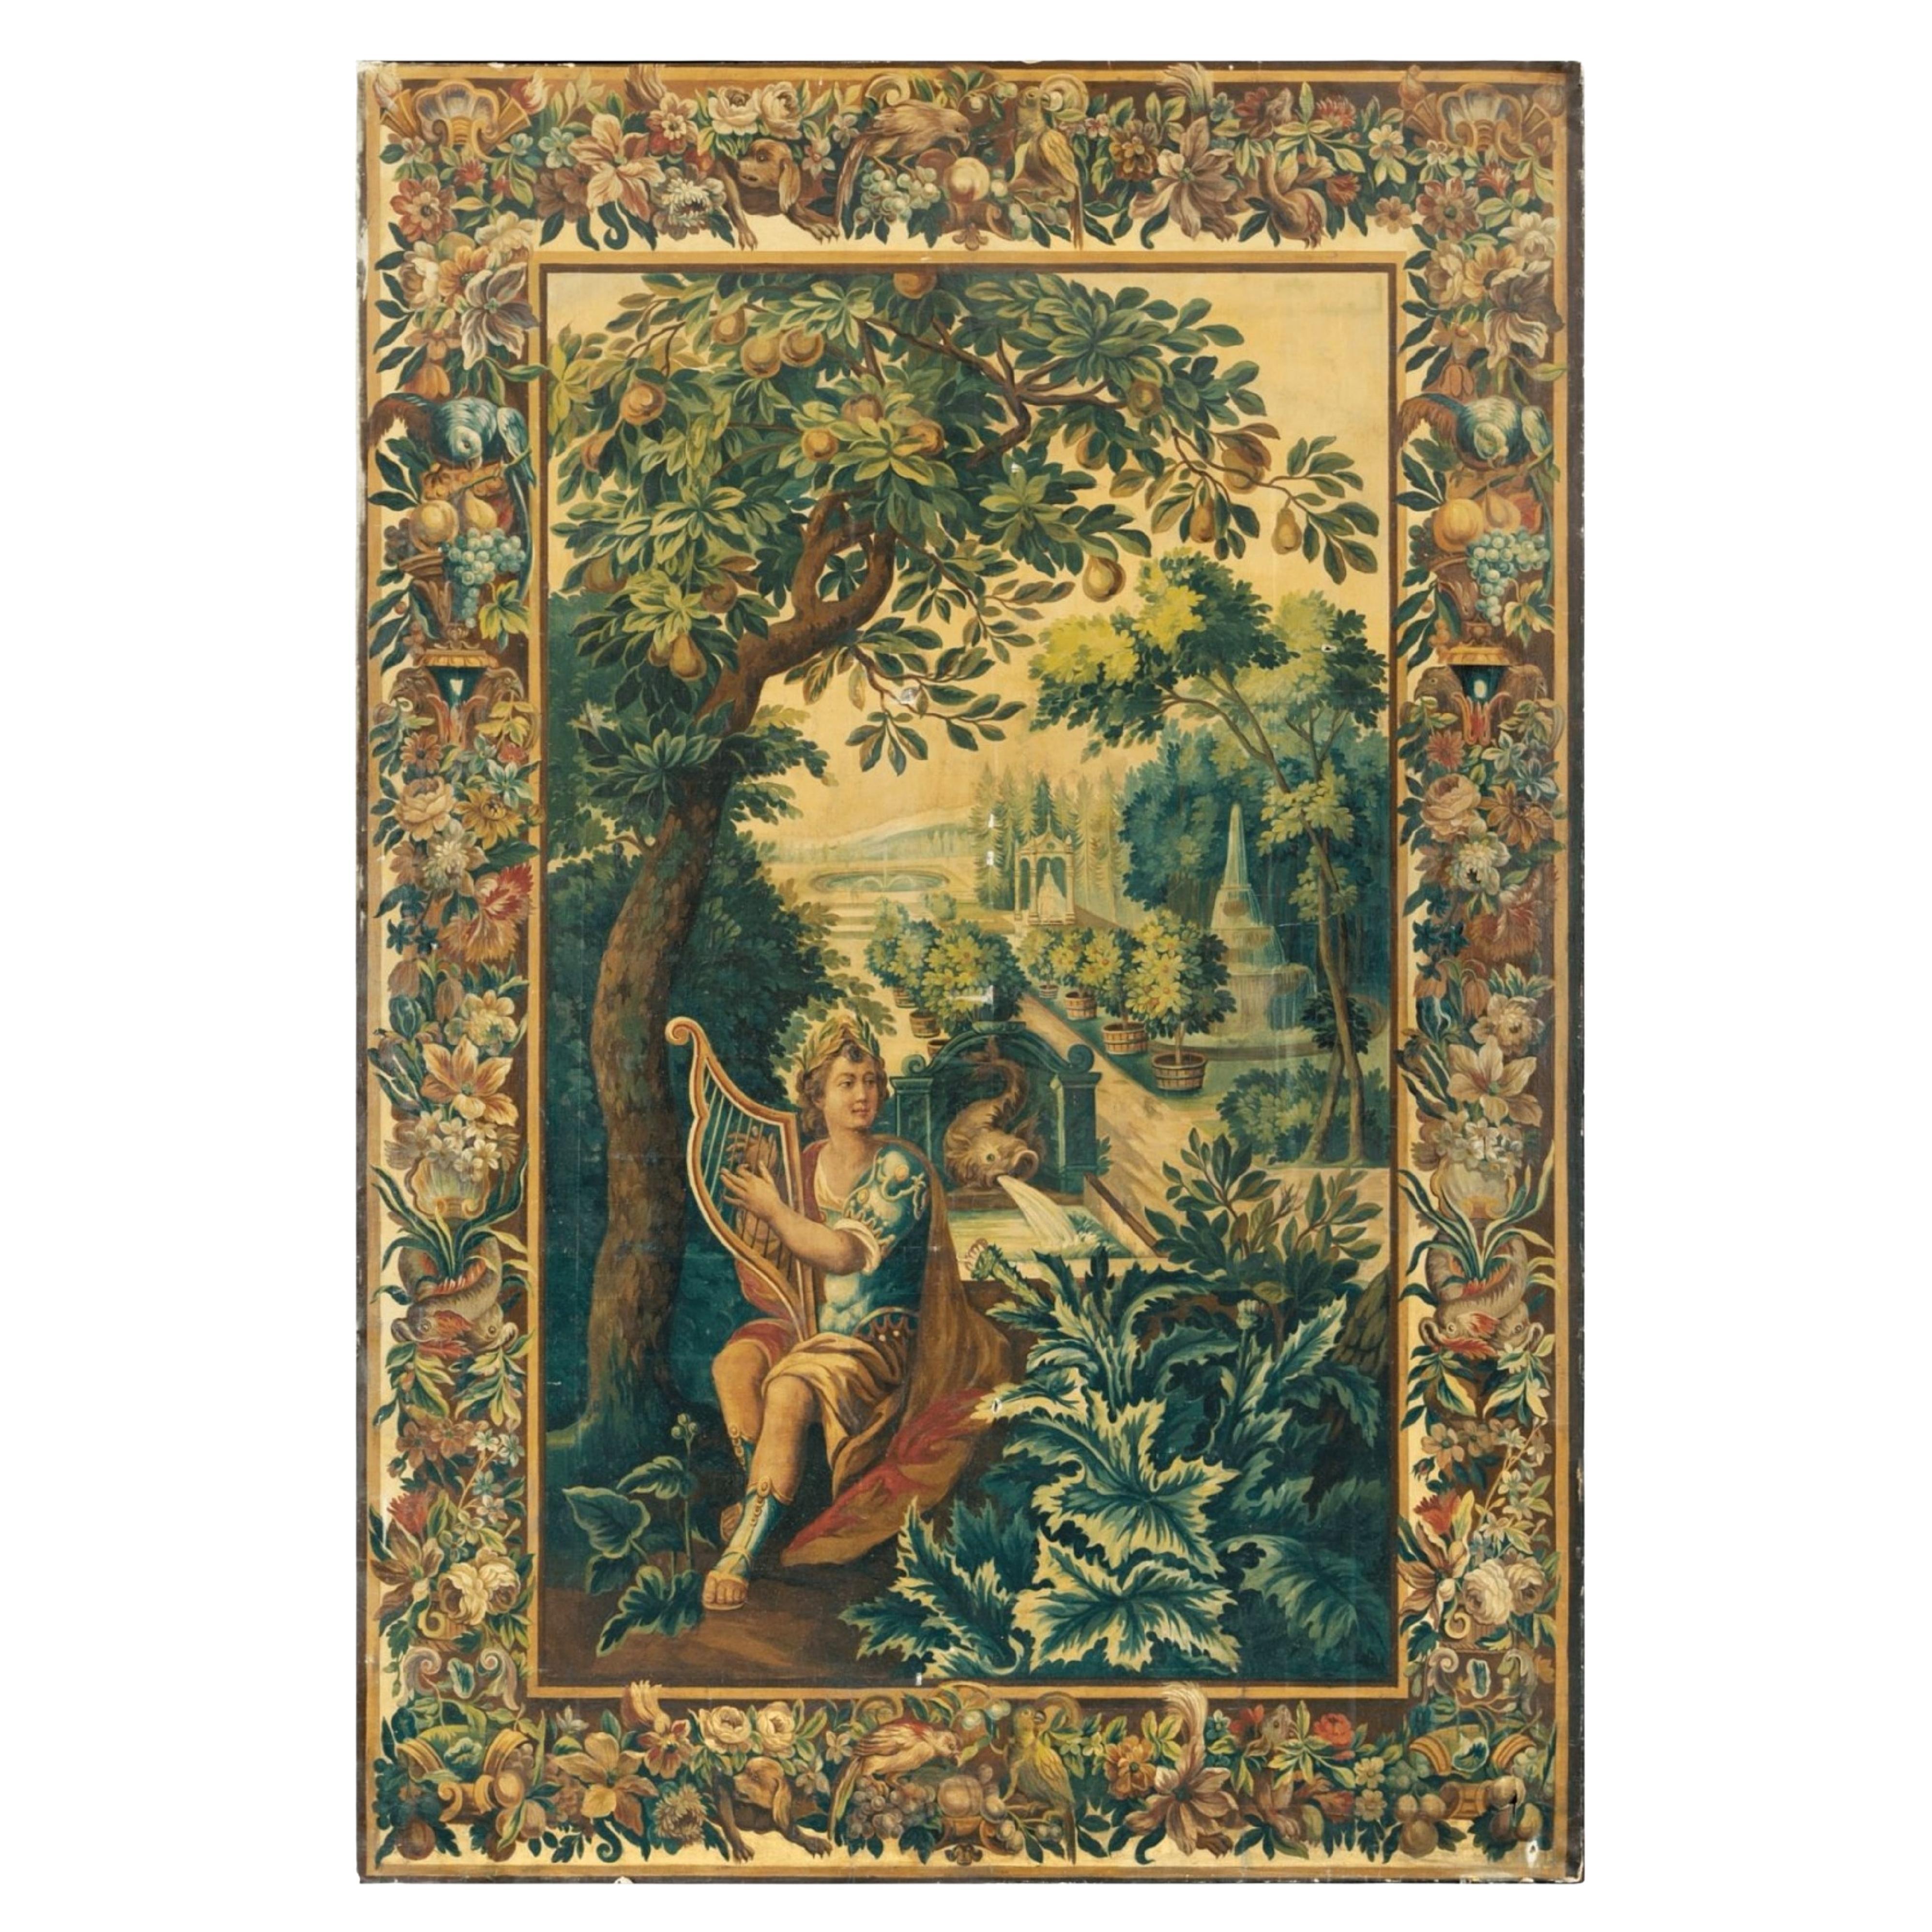 IMPORTANT LARGE PAINTING Venetian School 18th Century H 275cm / 108.26 inches For Sale